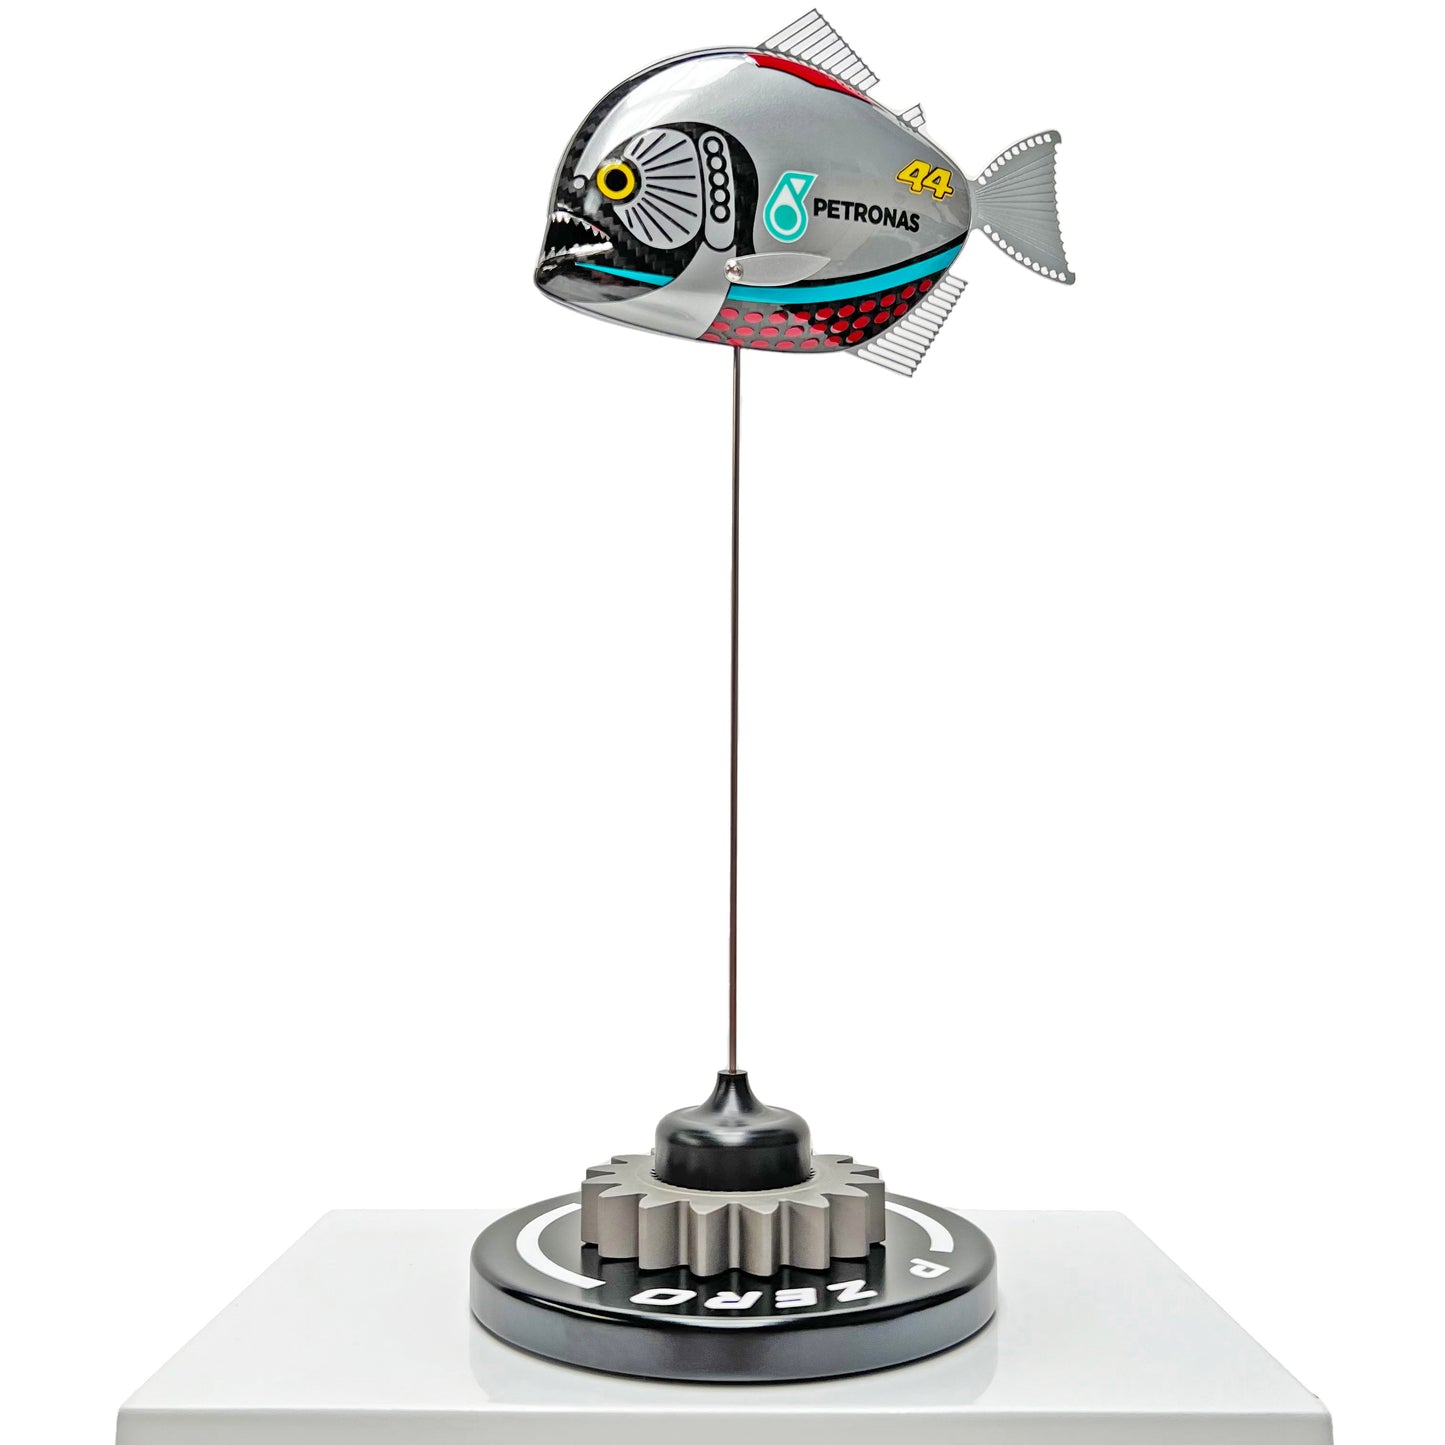 Carbon fibre piranha sculpture with Mercedes livery on a black base with F1 gear